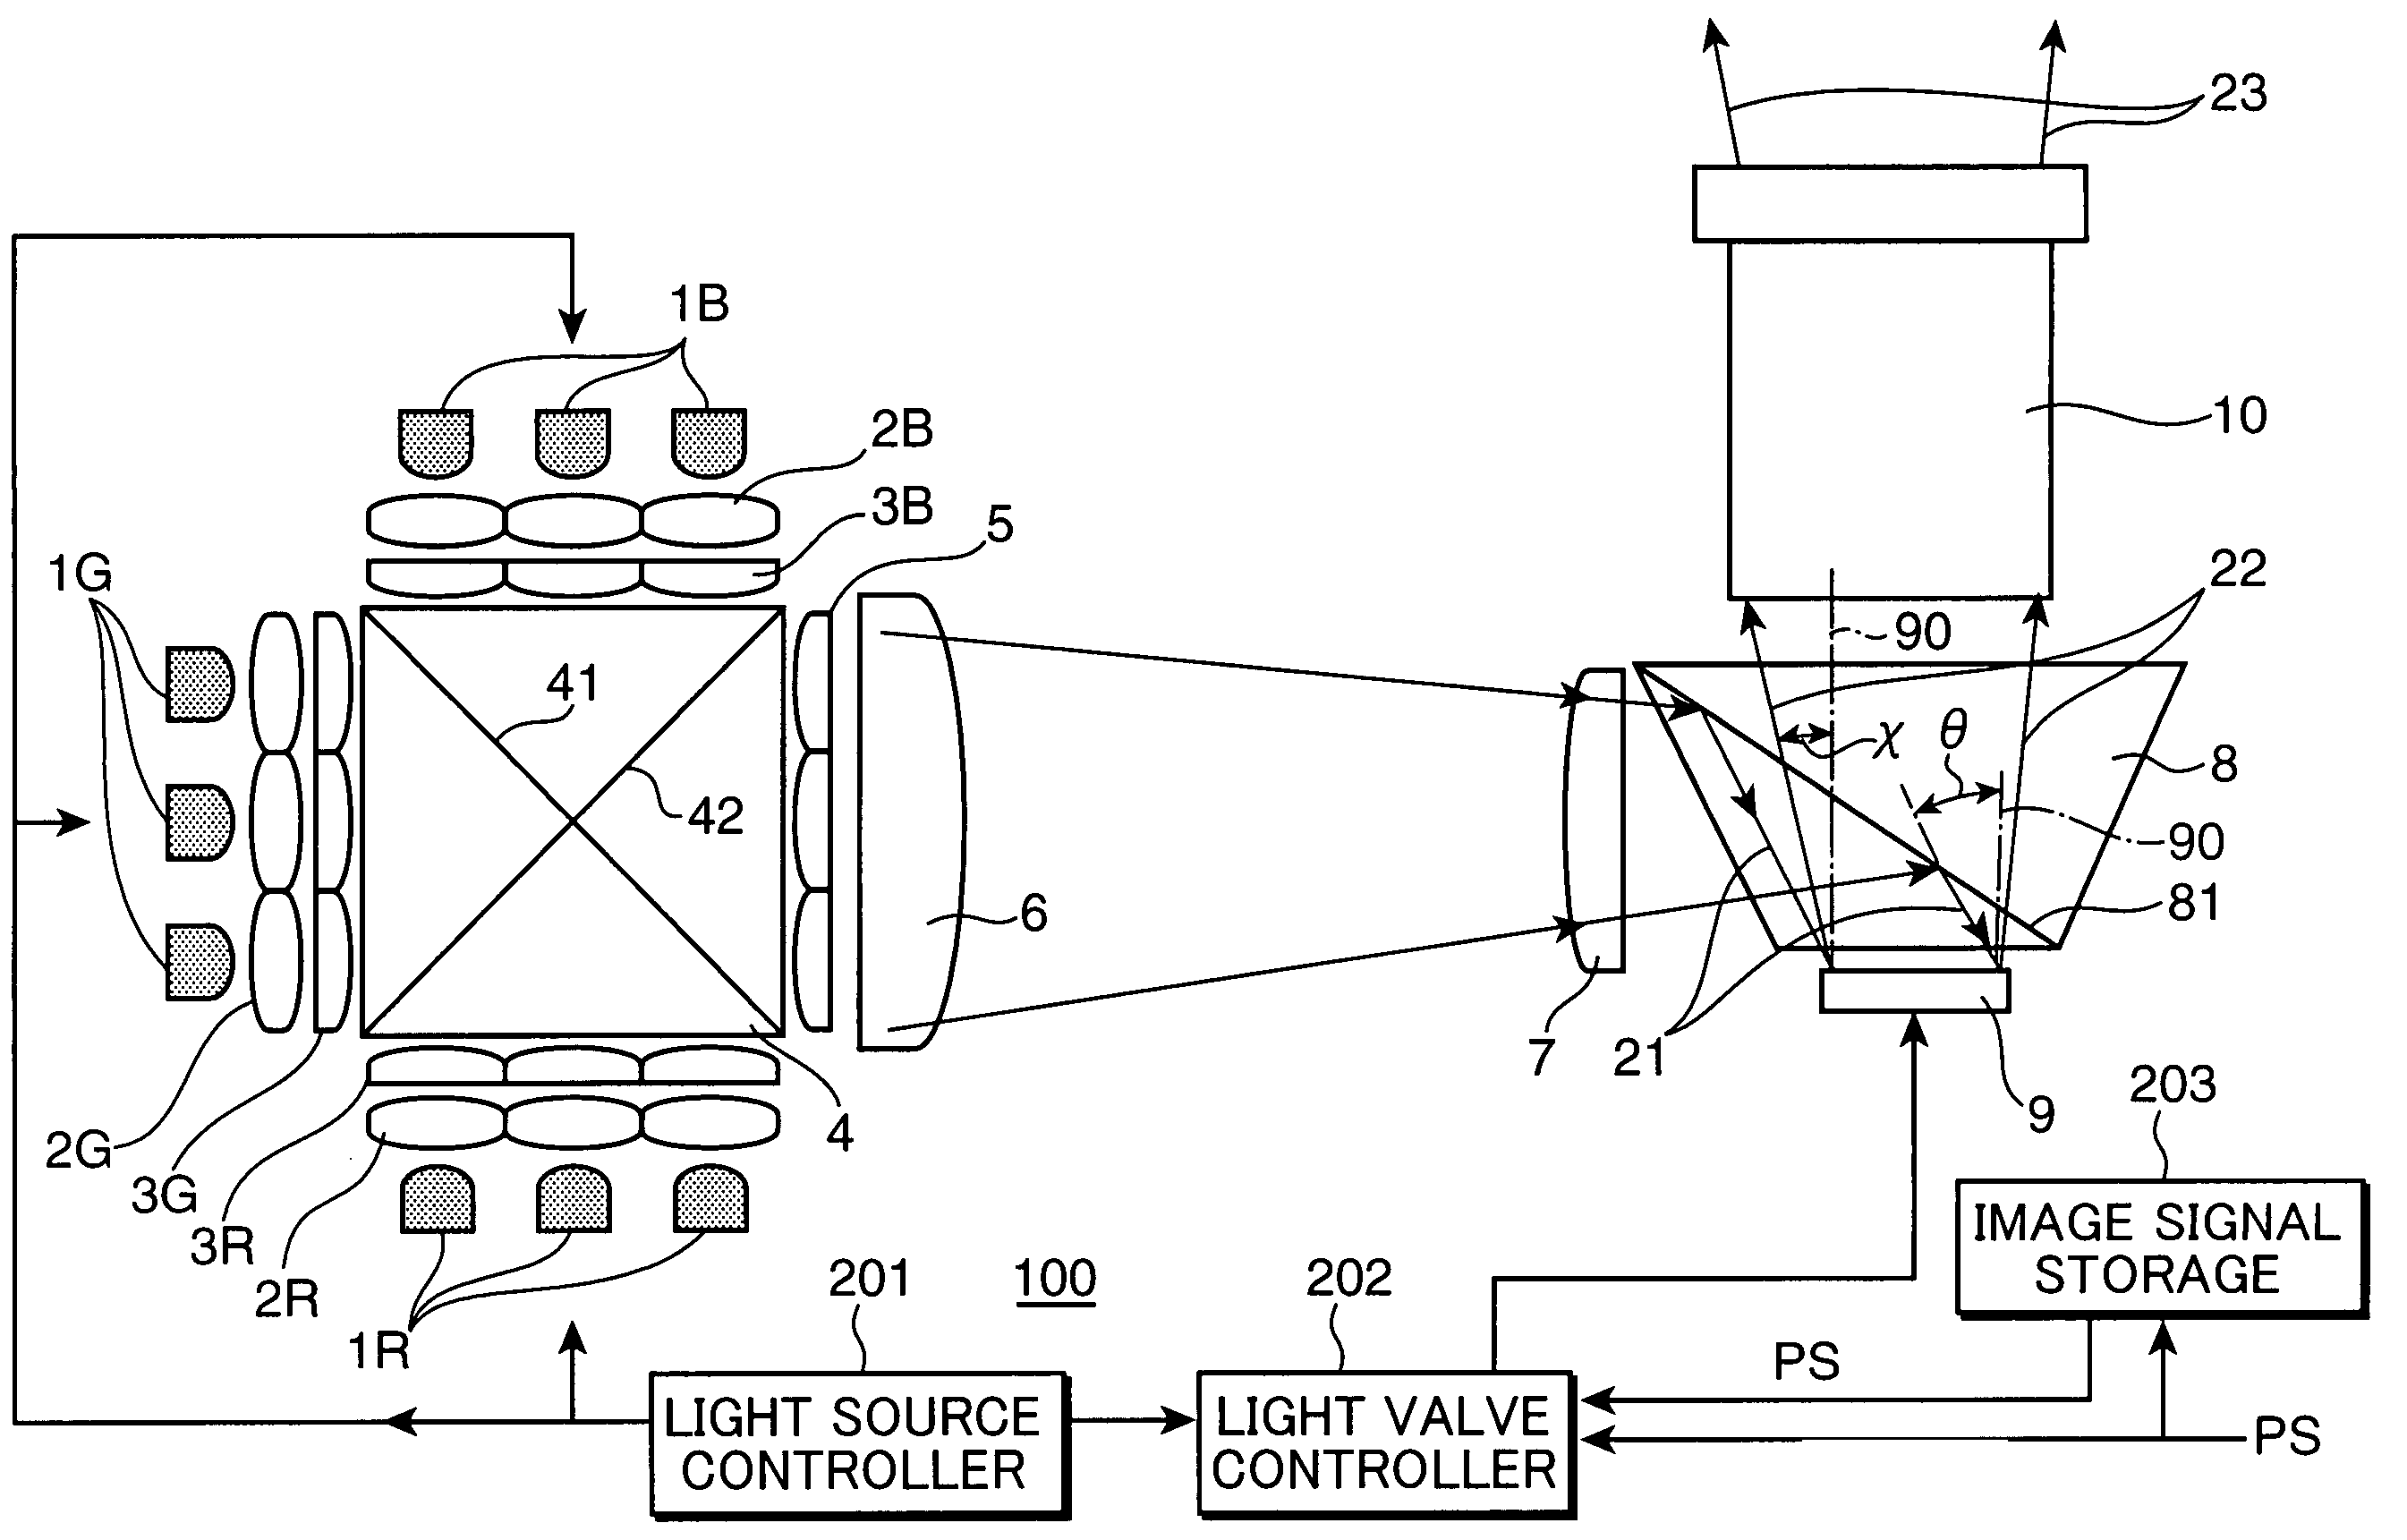 Illumination apparatus and video projection display system